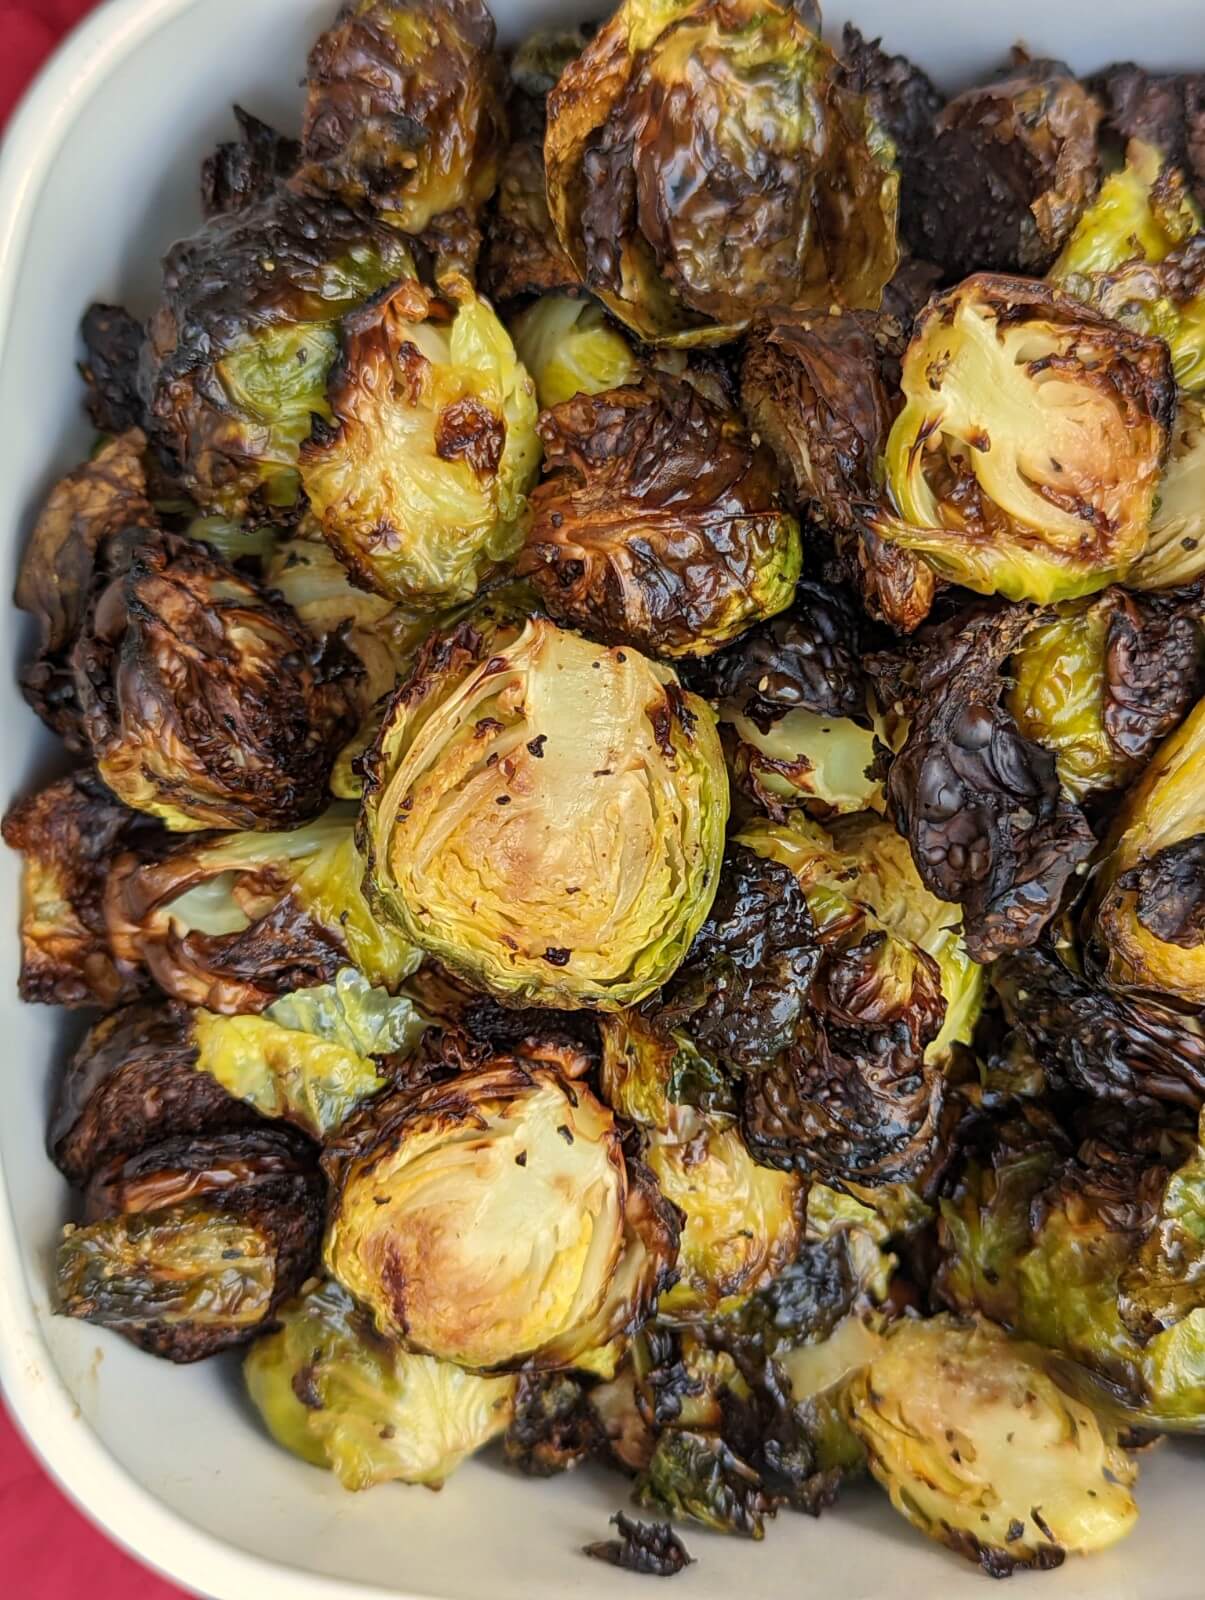 Brussel sprouts in a serving dish.